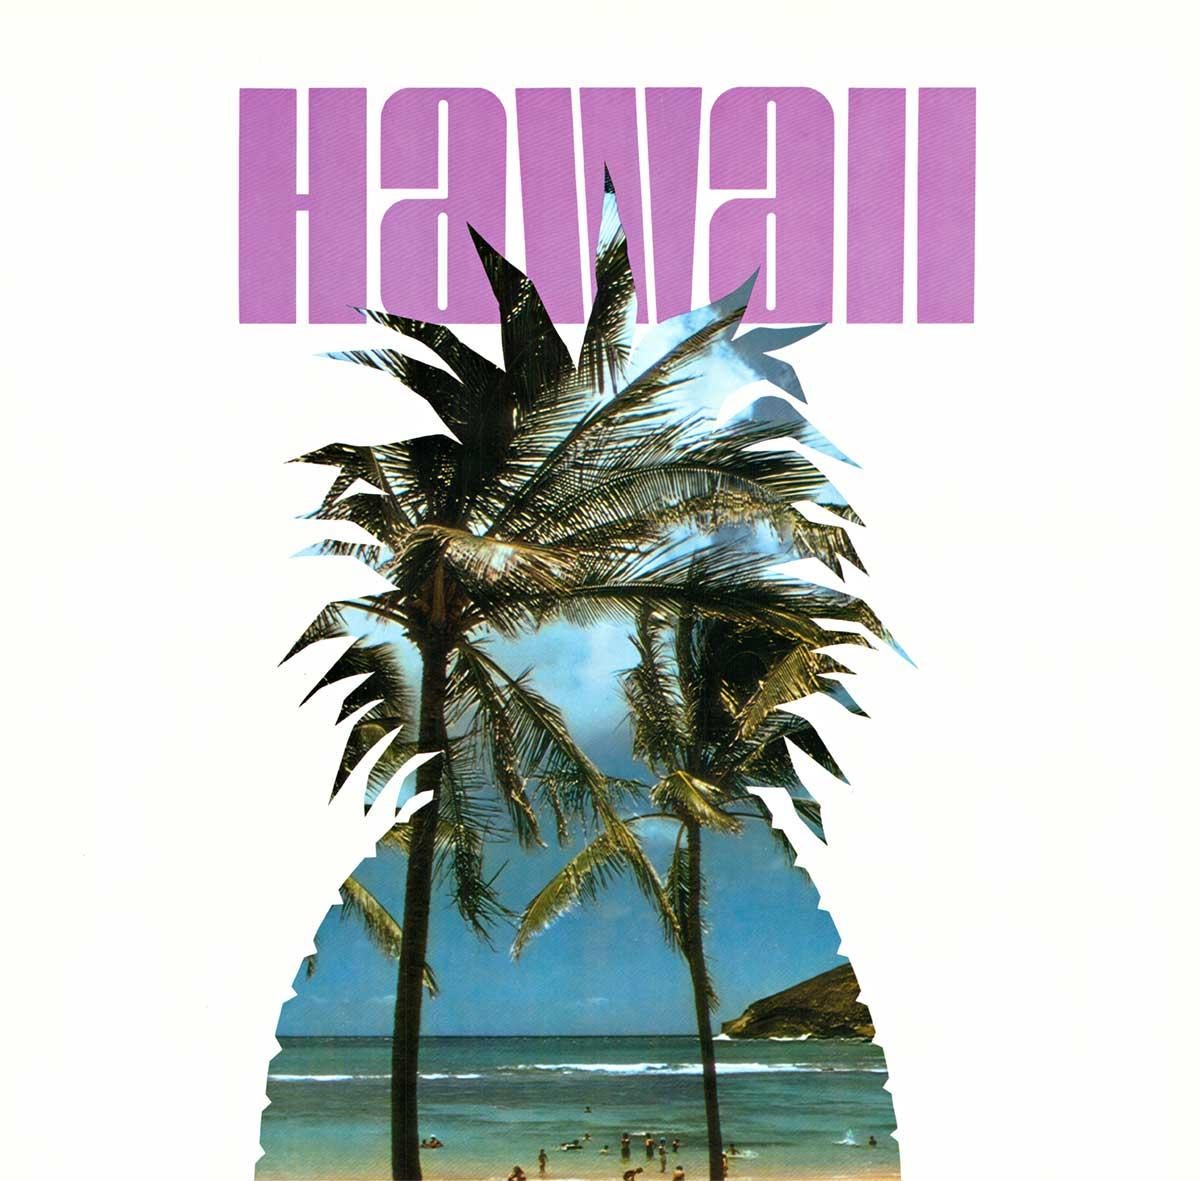 Original Hawaii Western Airlines vintage travel poster - American Realist Print by Unknown